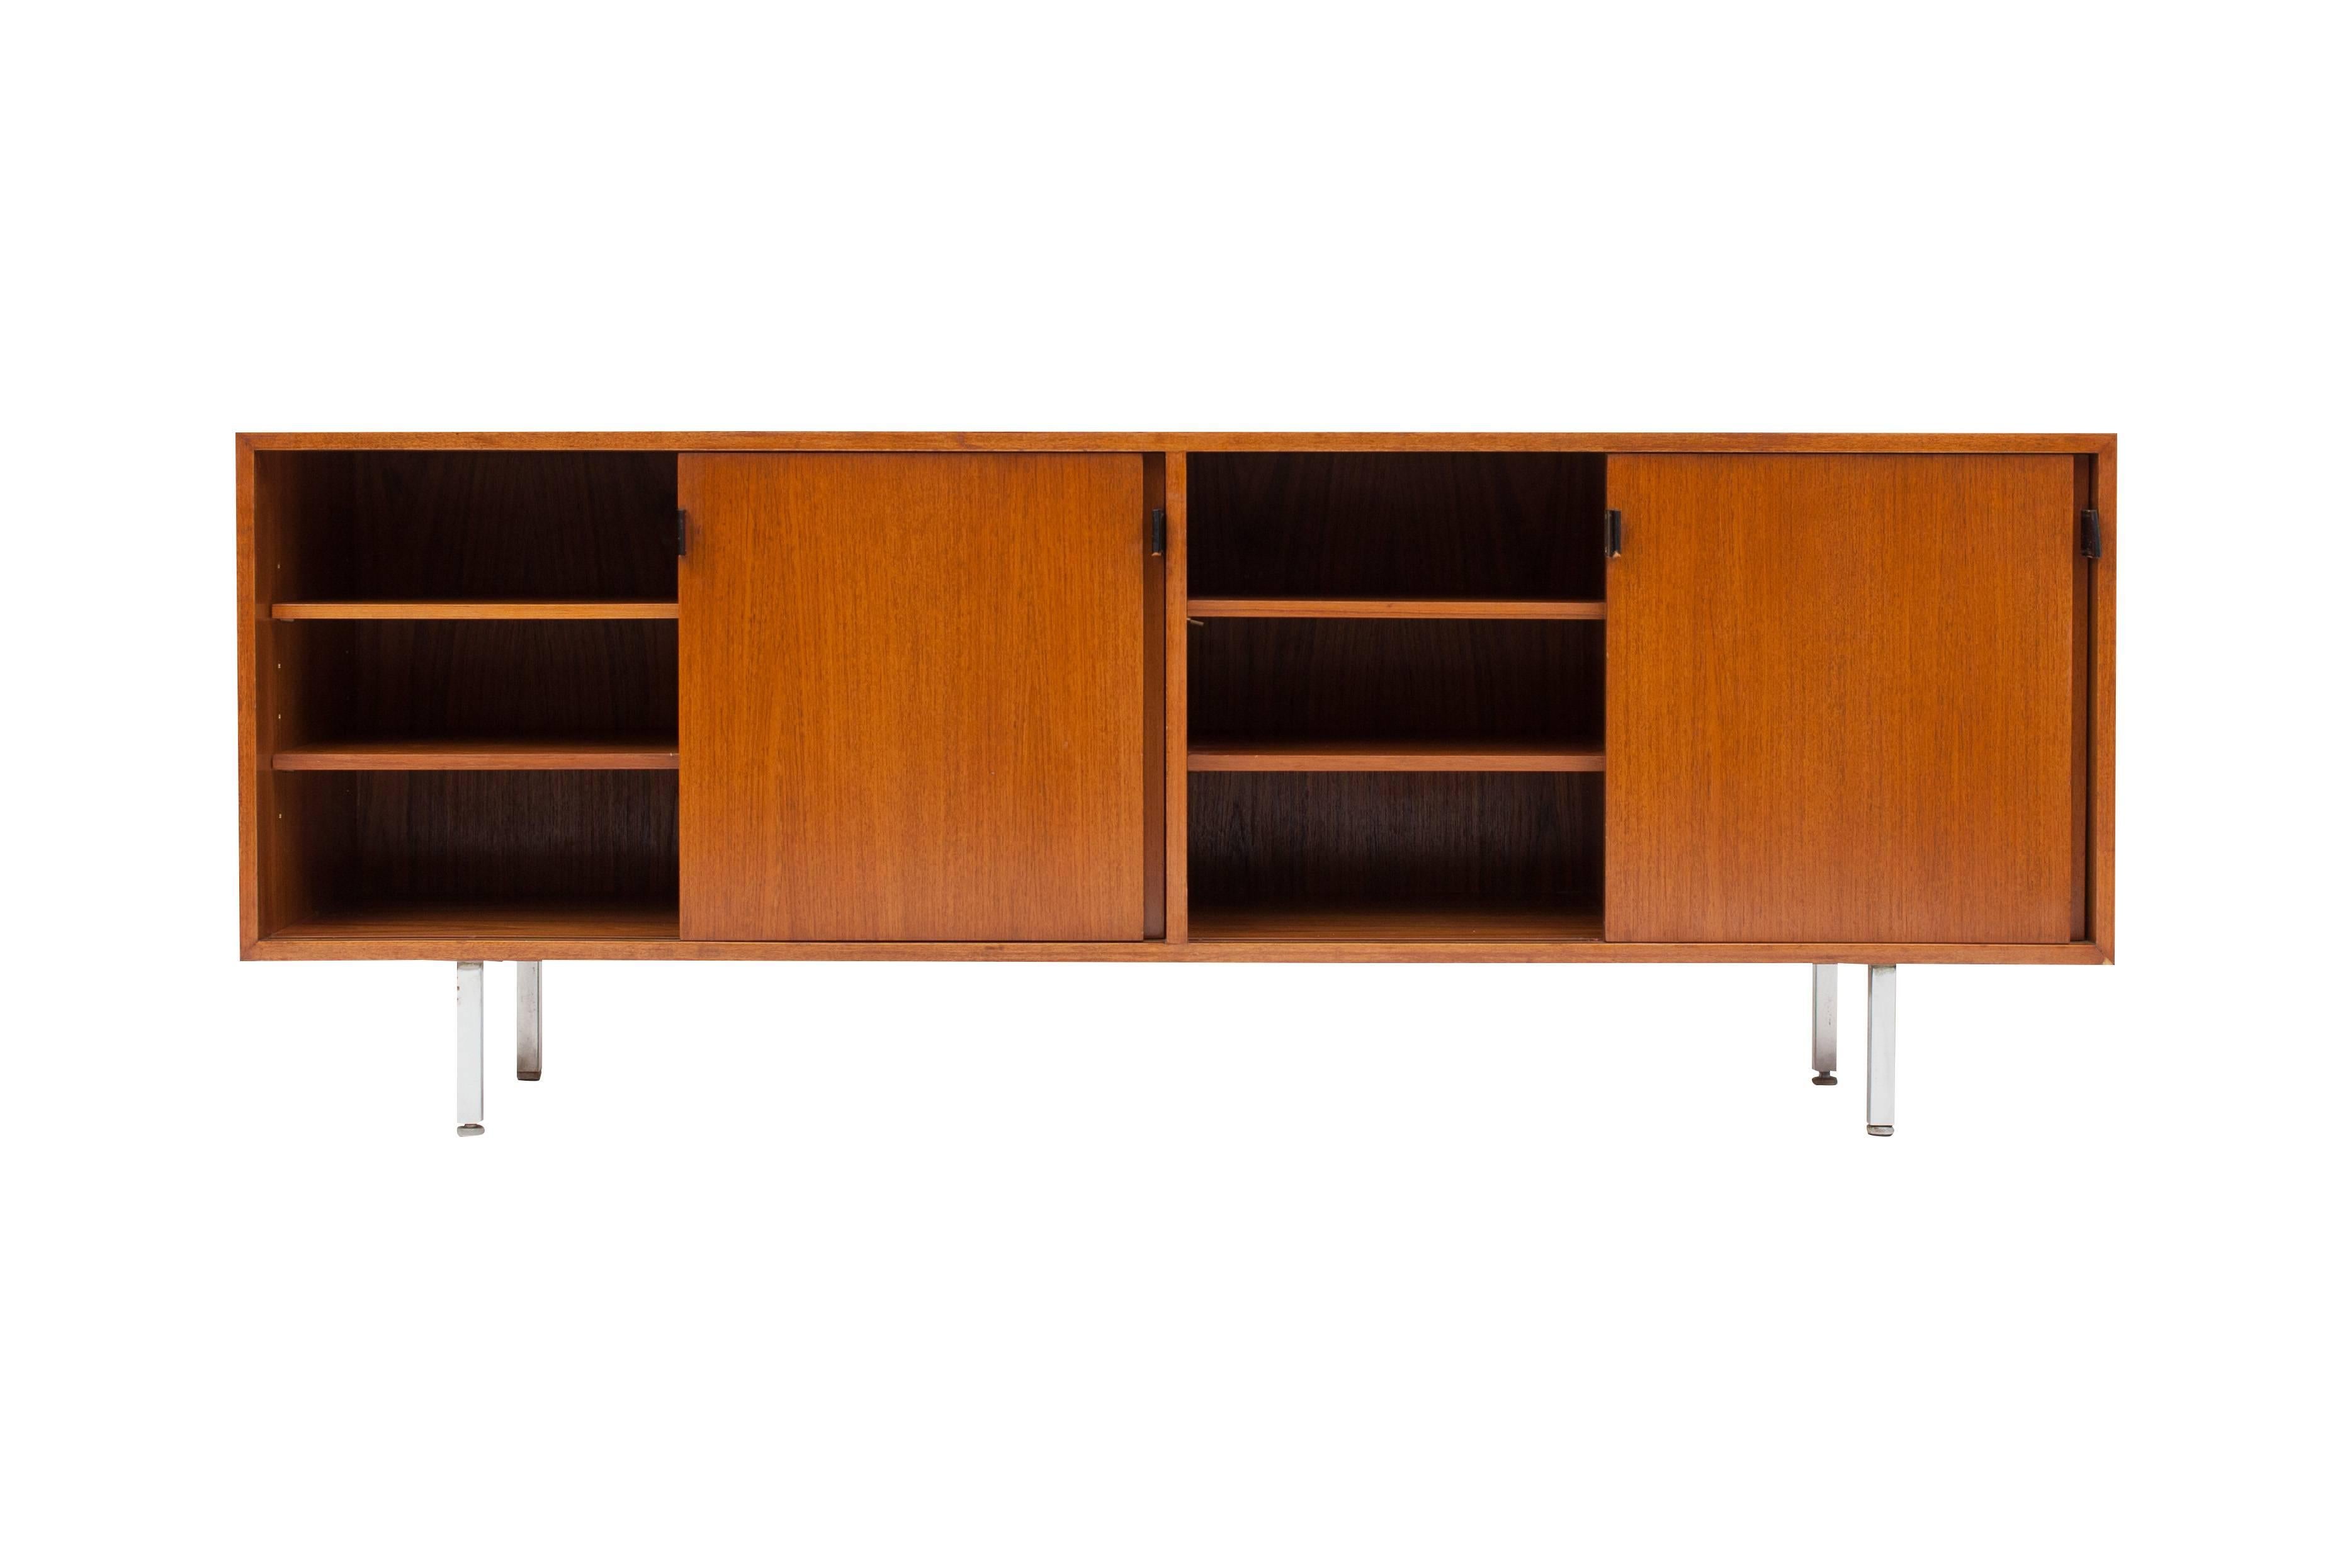 Mid-Century Modern Florence Knoll Credenza in Teak, Manufactured by De Coene, 1950s